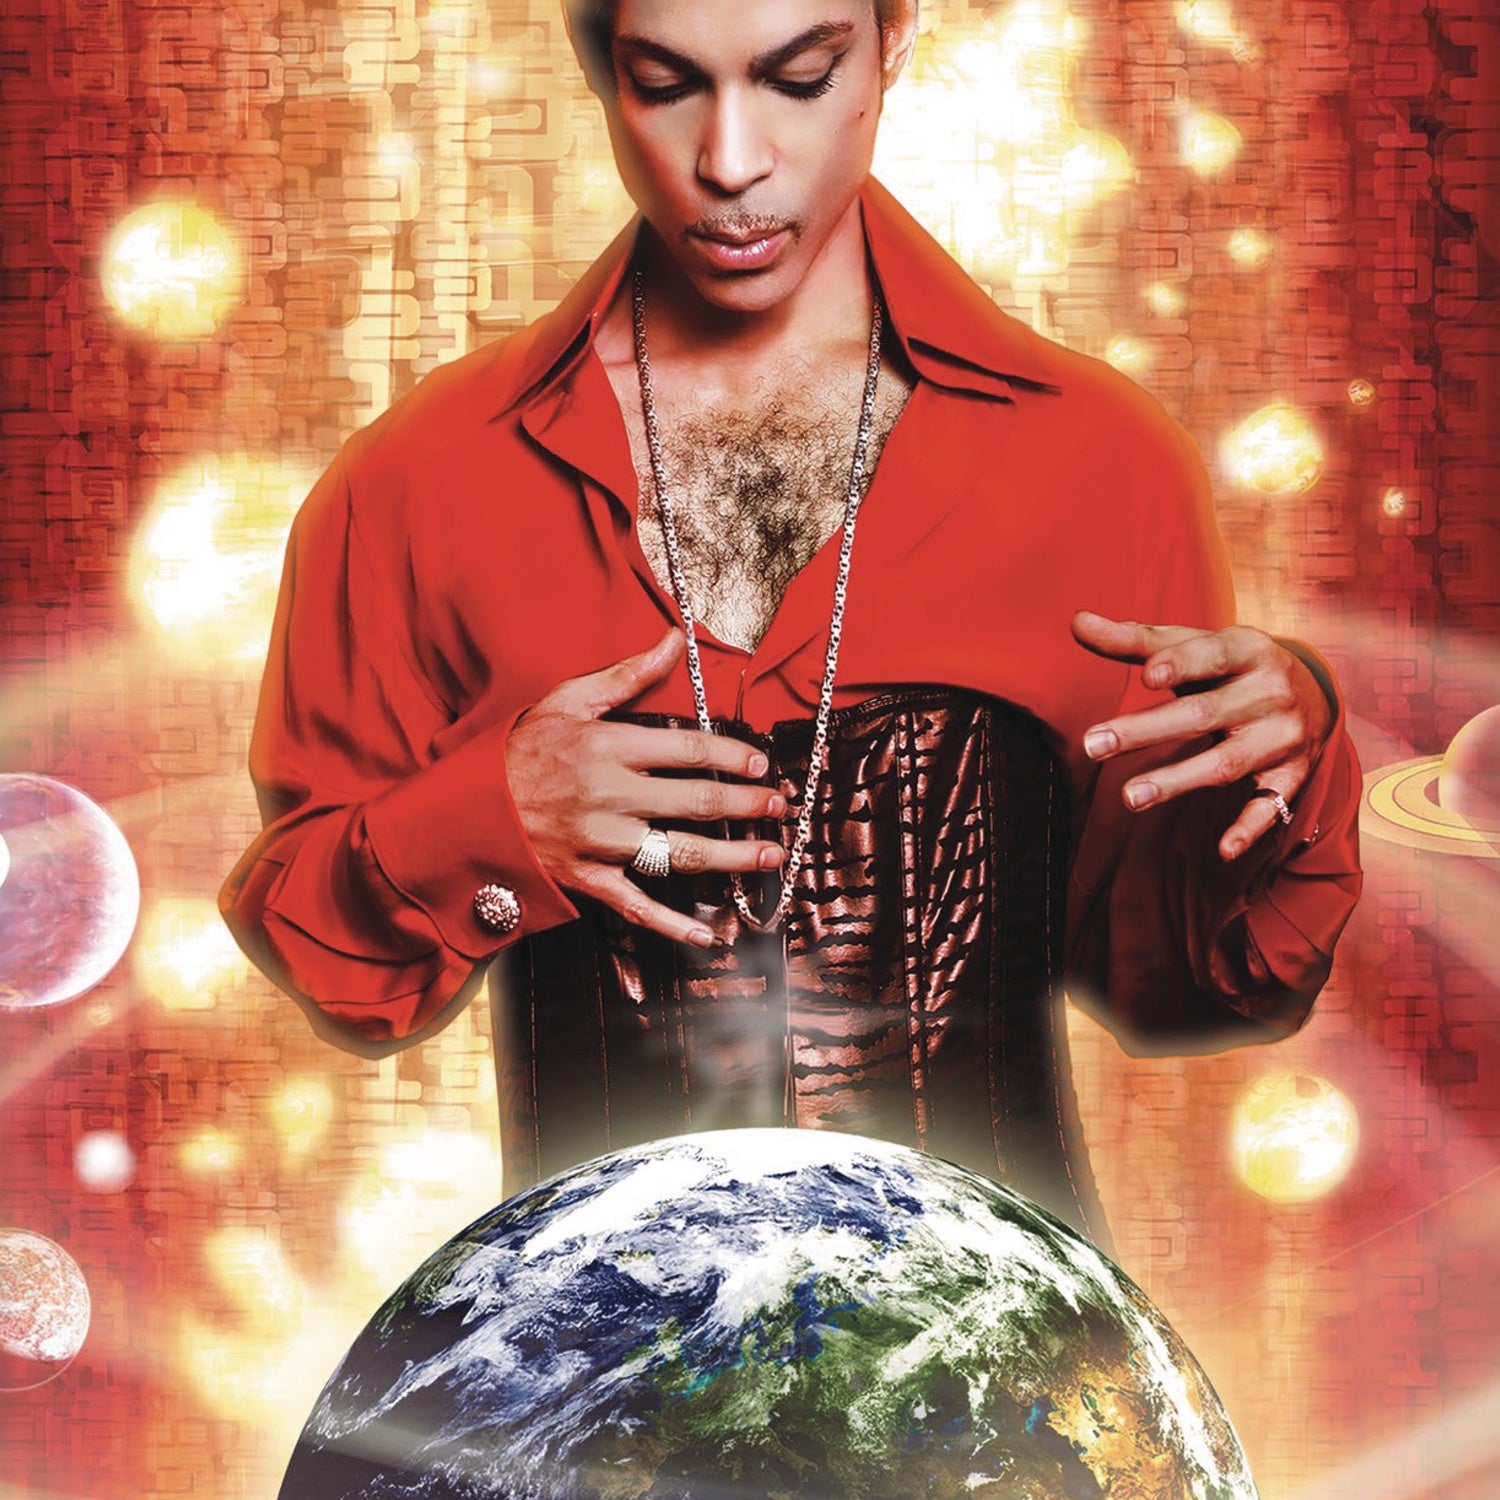 Prince - Planet Earth - New Vinyl Lp 2019 Legacy Pressing on Limited 150gram Purple Vinyl with Lenticular Jacket - Rock / Funk / Purple Lord